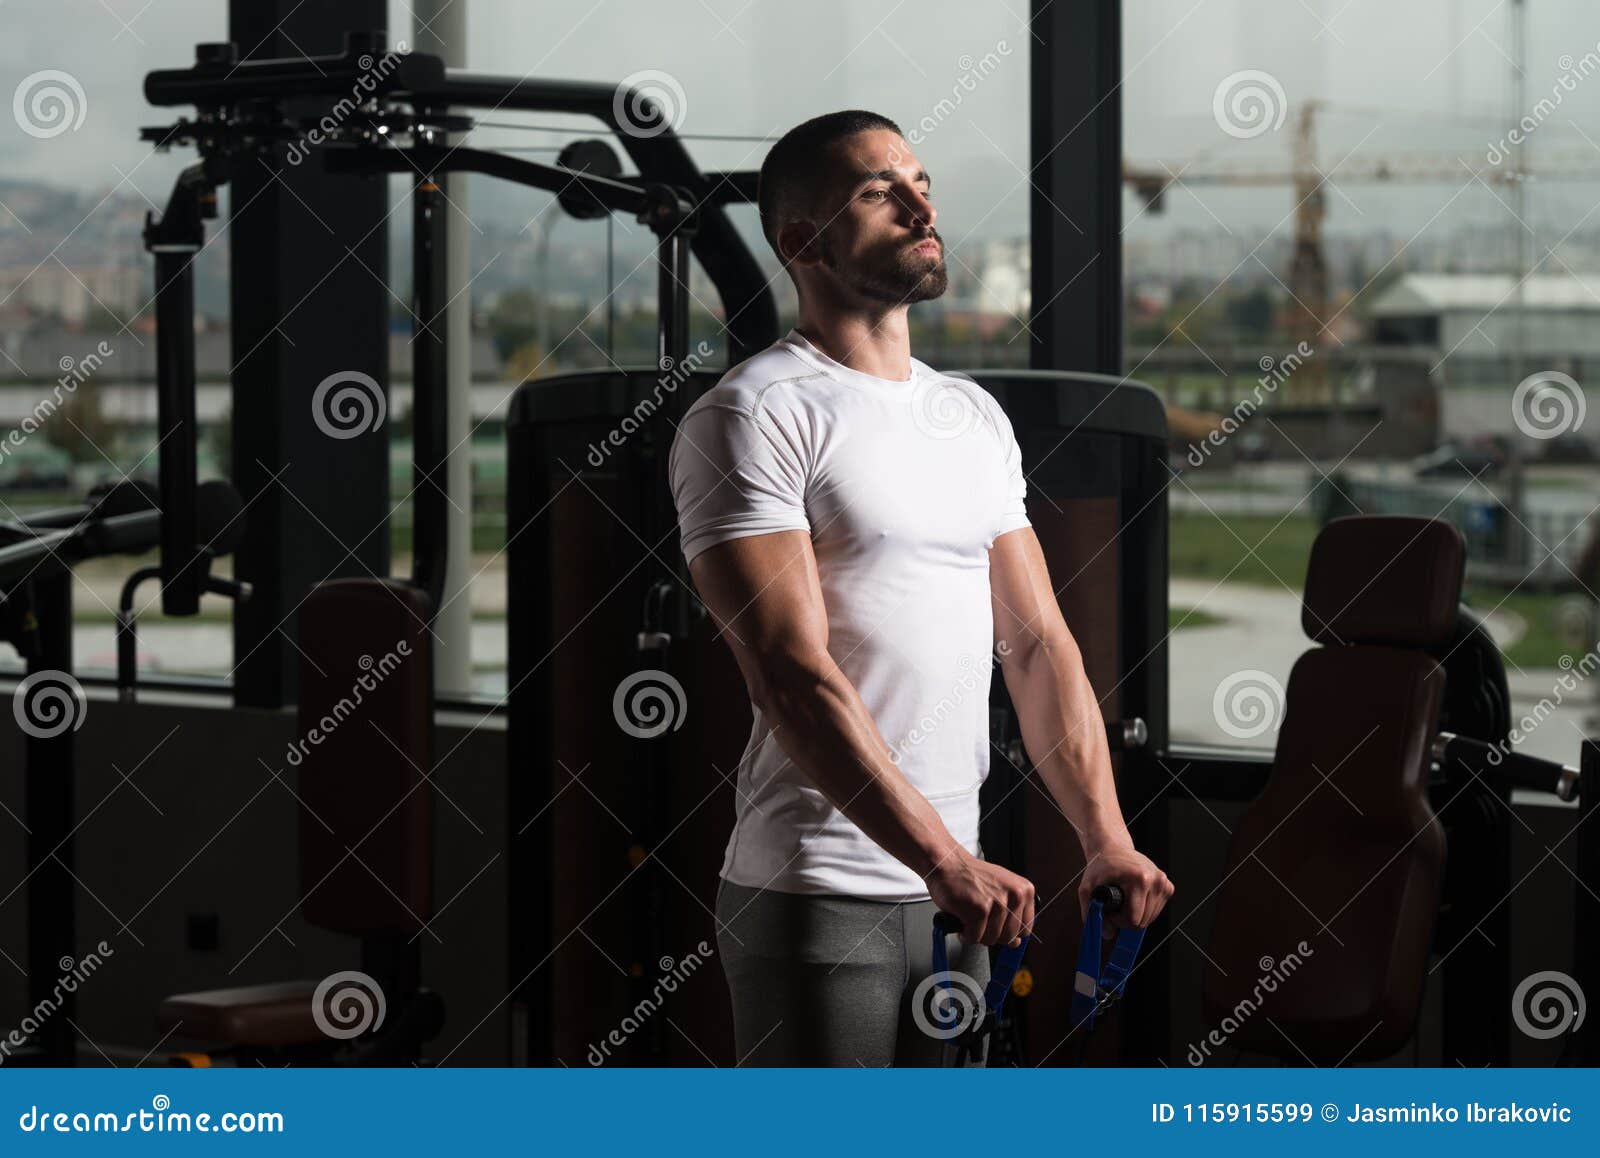 Shoulder Exercise with Pull Rope Elastic Cable Stock Image - Image of  muscles, lifestyle: 115915599